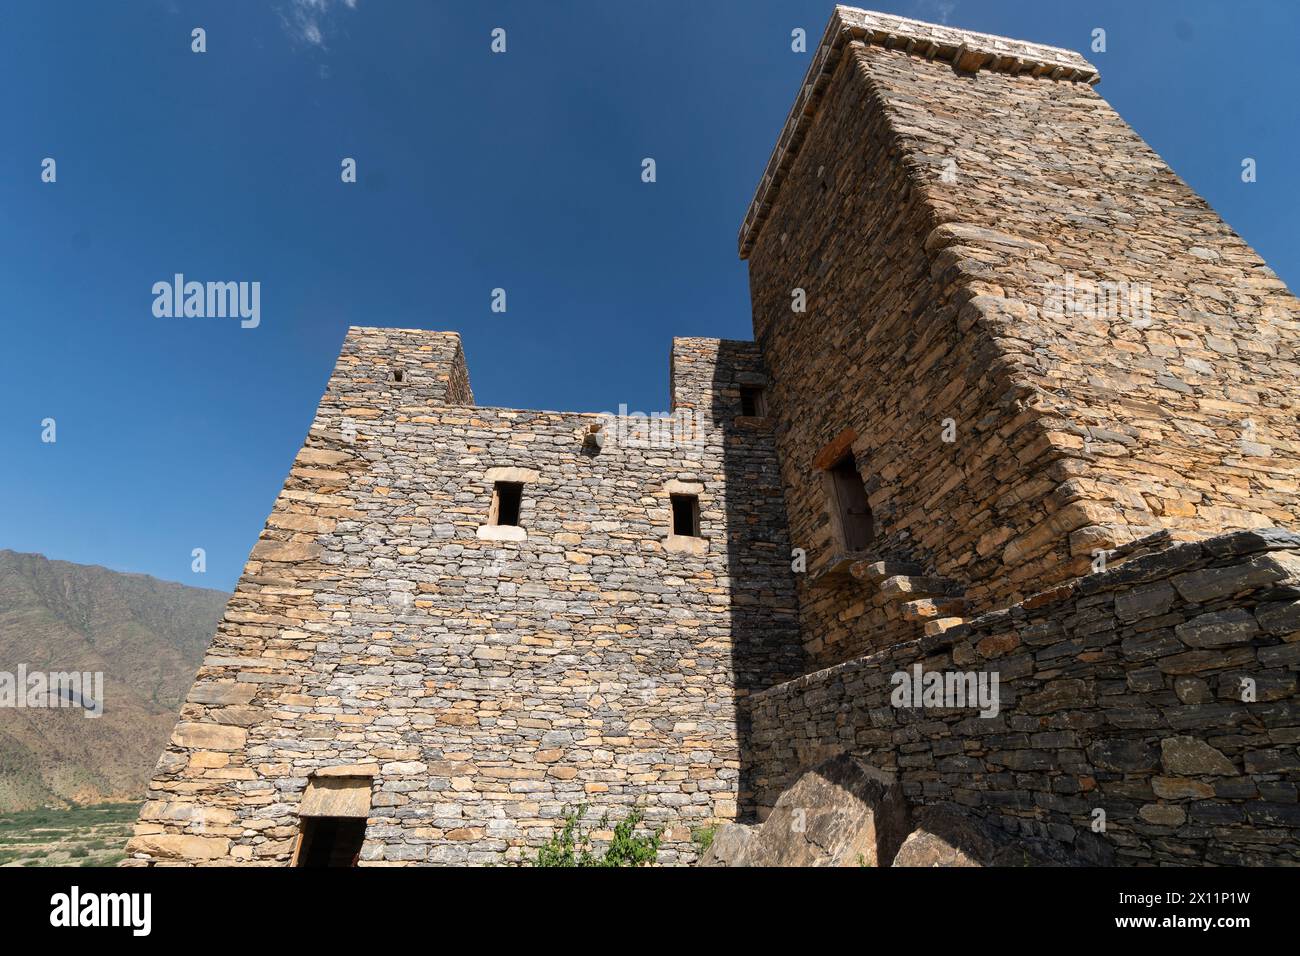 Al-Bahah, Saudi Arabia: Exterior view of the Thee Ain ancient village, known as the marble village, near Jeddah in Saudi Arabia on a hot sunny day. Stock Photo